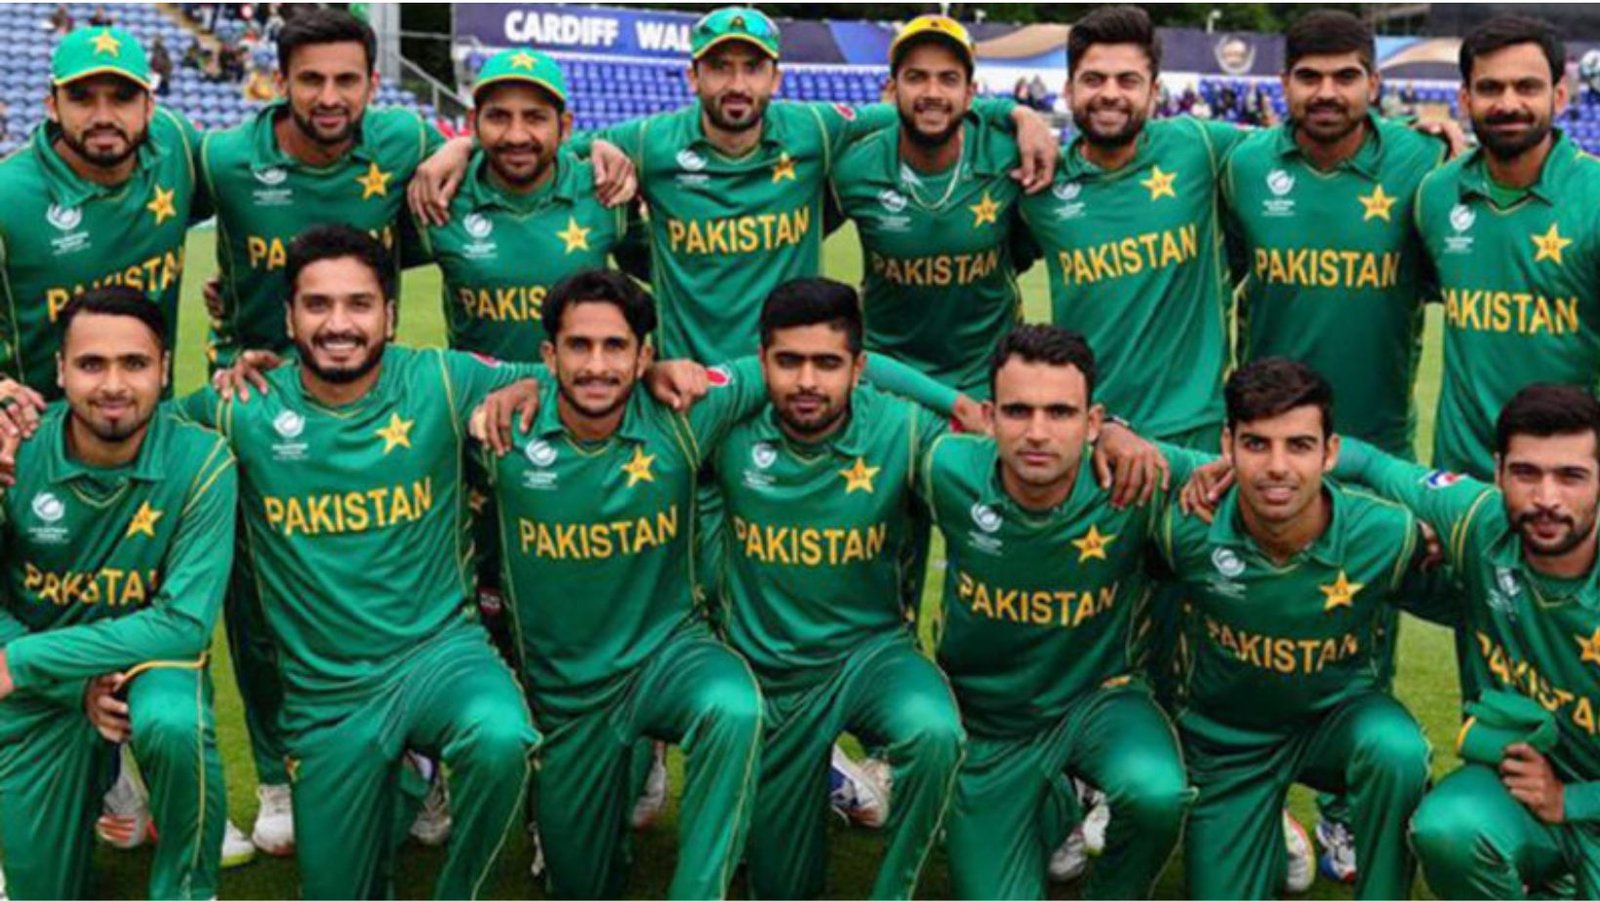 According to statistics, Pakistan has had the best T20I team in the past 12 months